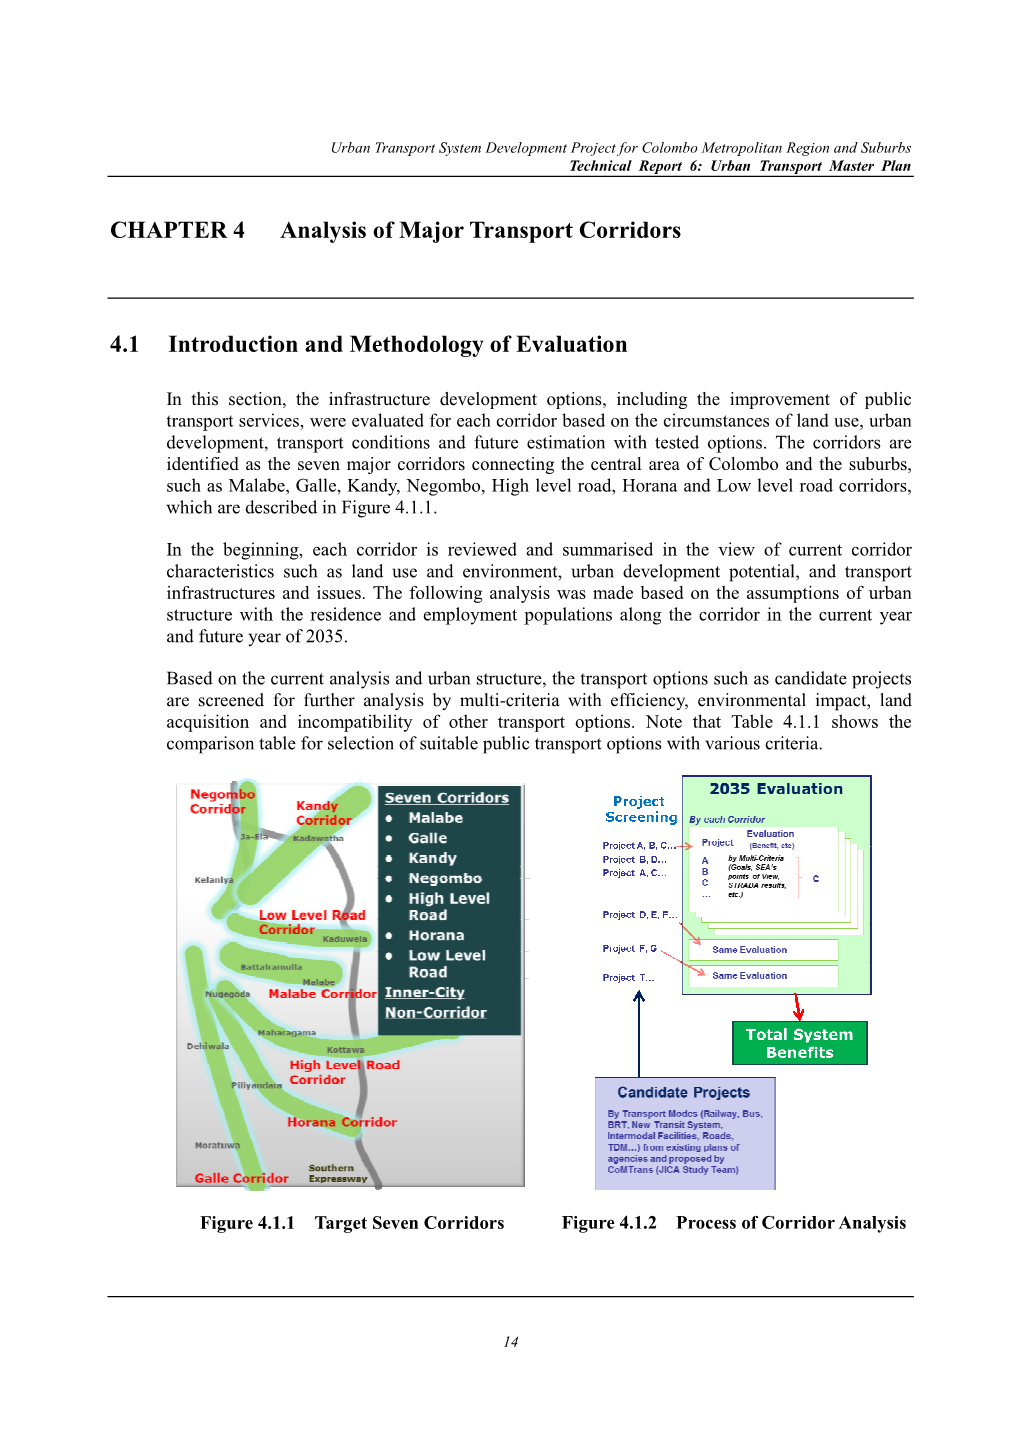 CHAPTER 4 Analysis of Major Transport Corridors 4.1 Introduction